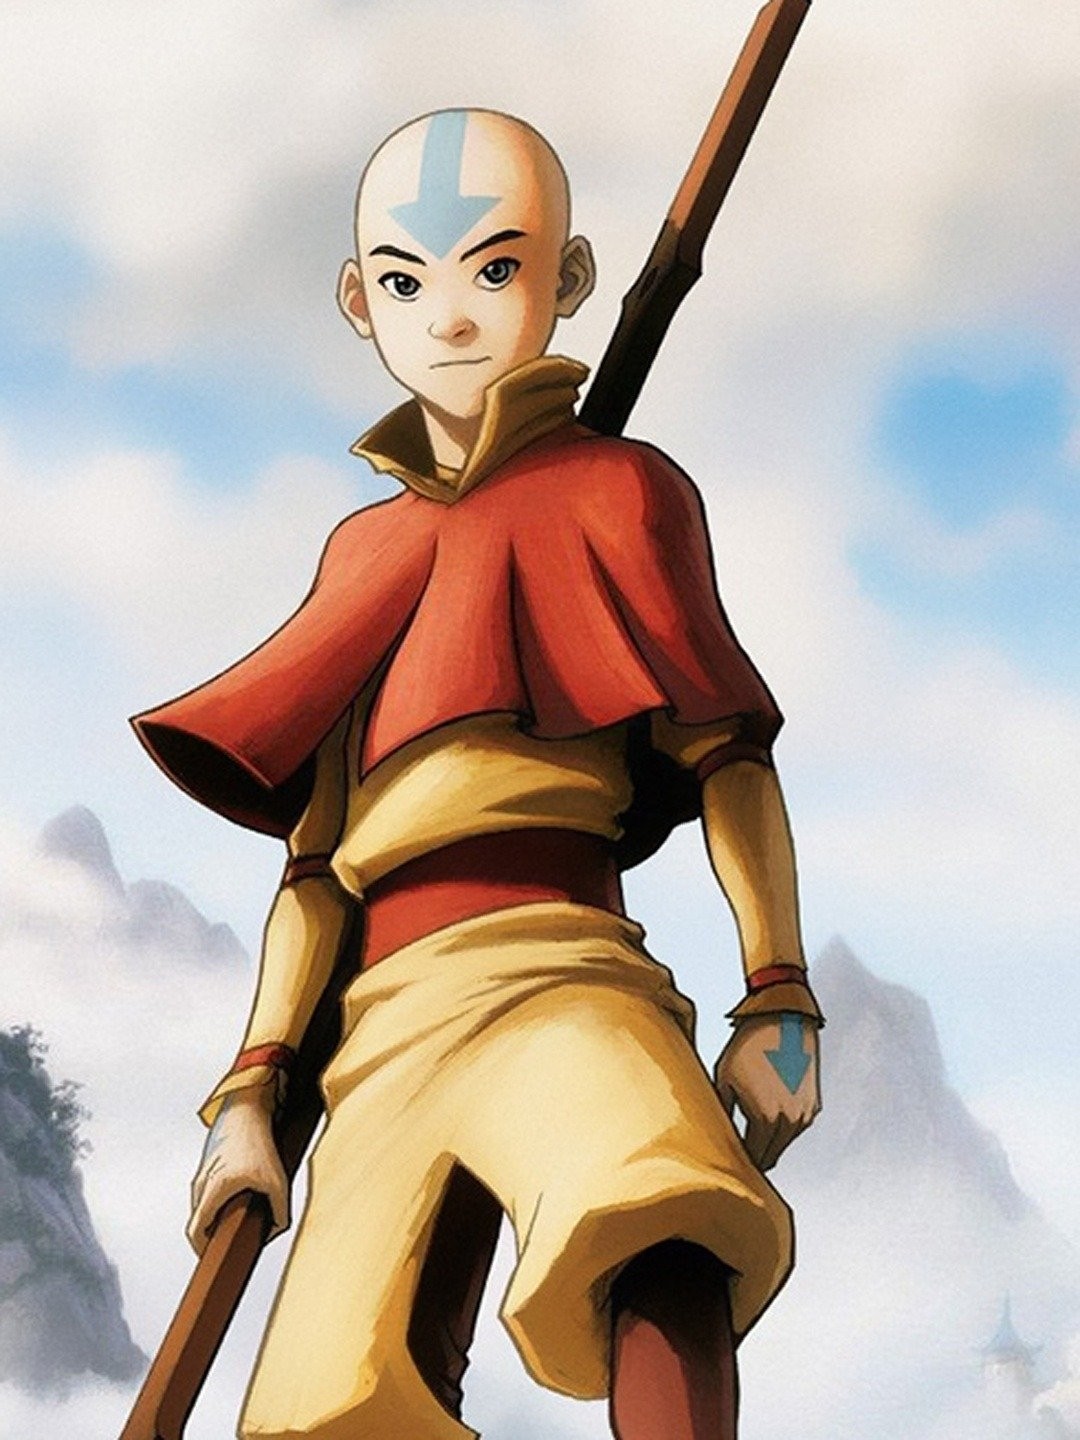 53 Of The BEST Avatar The Last Airbender Quotes That Will Blow You Away